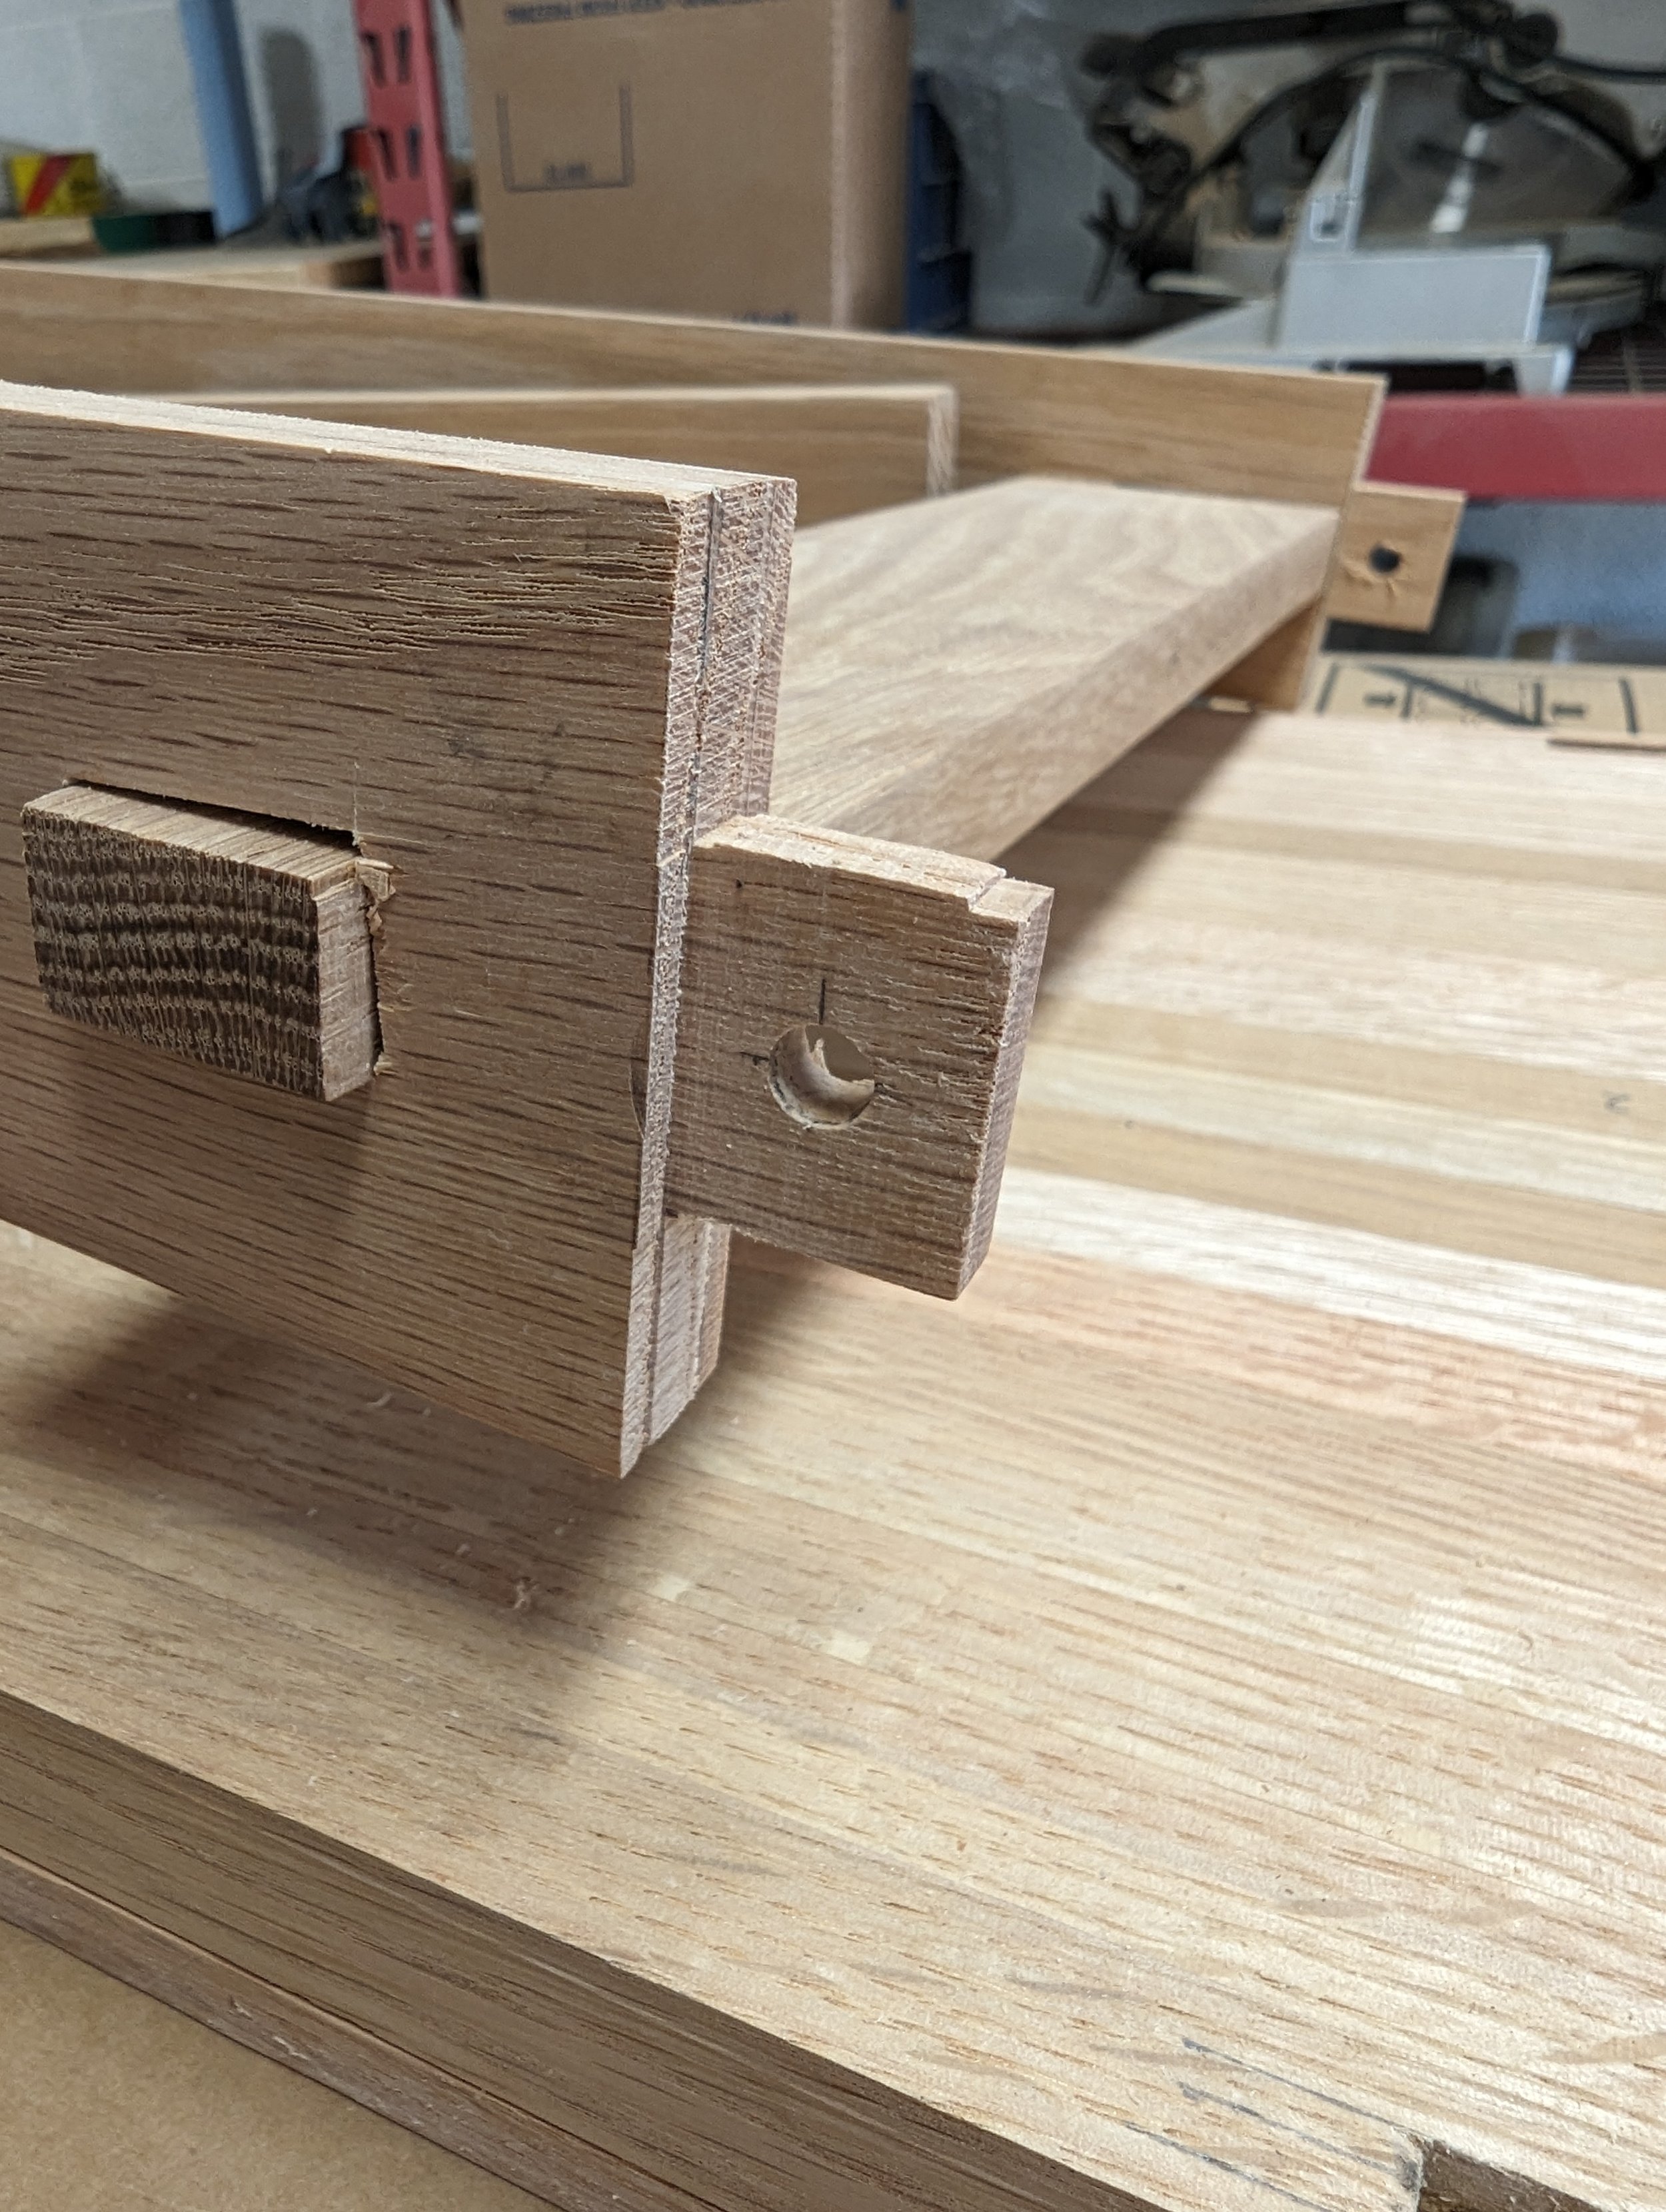  Here’s a view of the leg mortise with the dowel hold drilled 1/32” closer to the tenon shoulder. This difference in hole position provided additional clamping pressure during assembly. The cross member through-tenon is also shown here. 